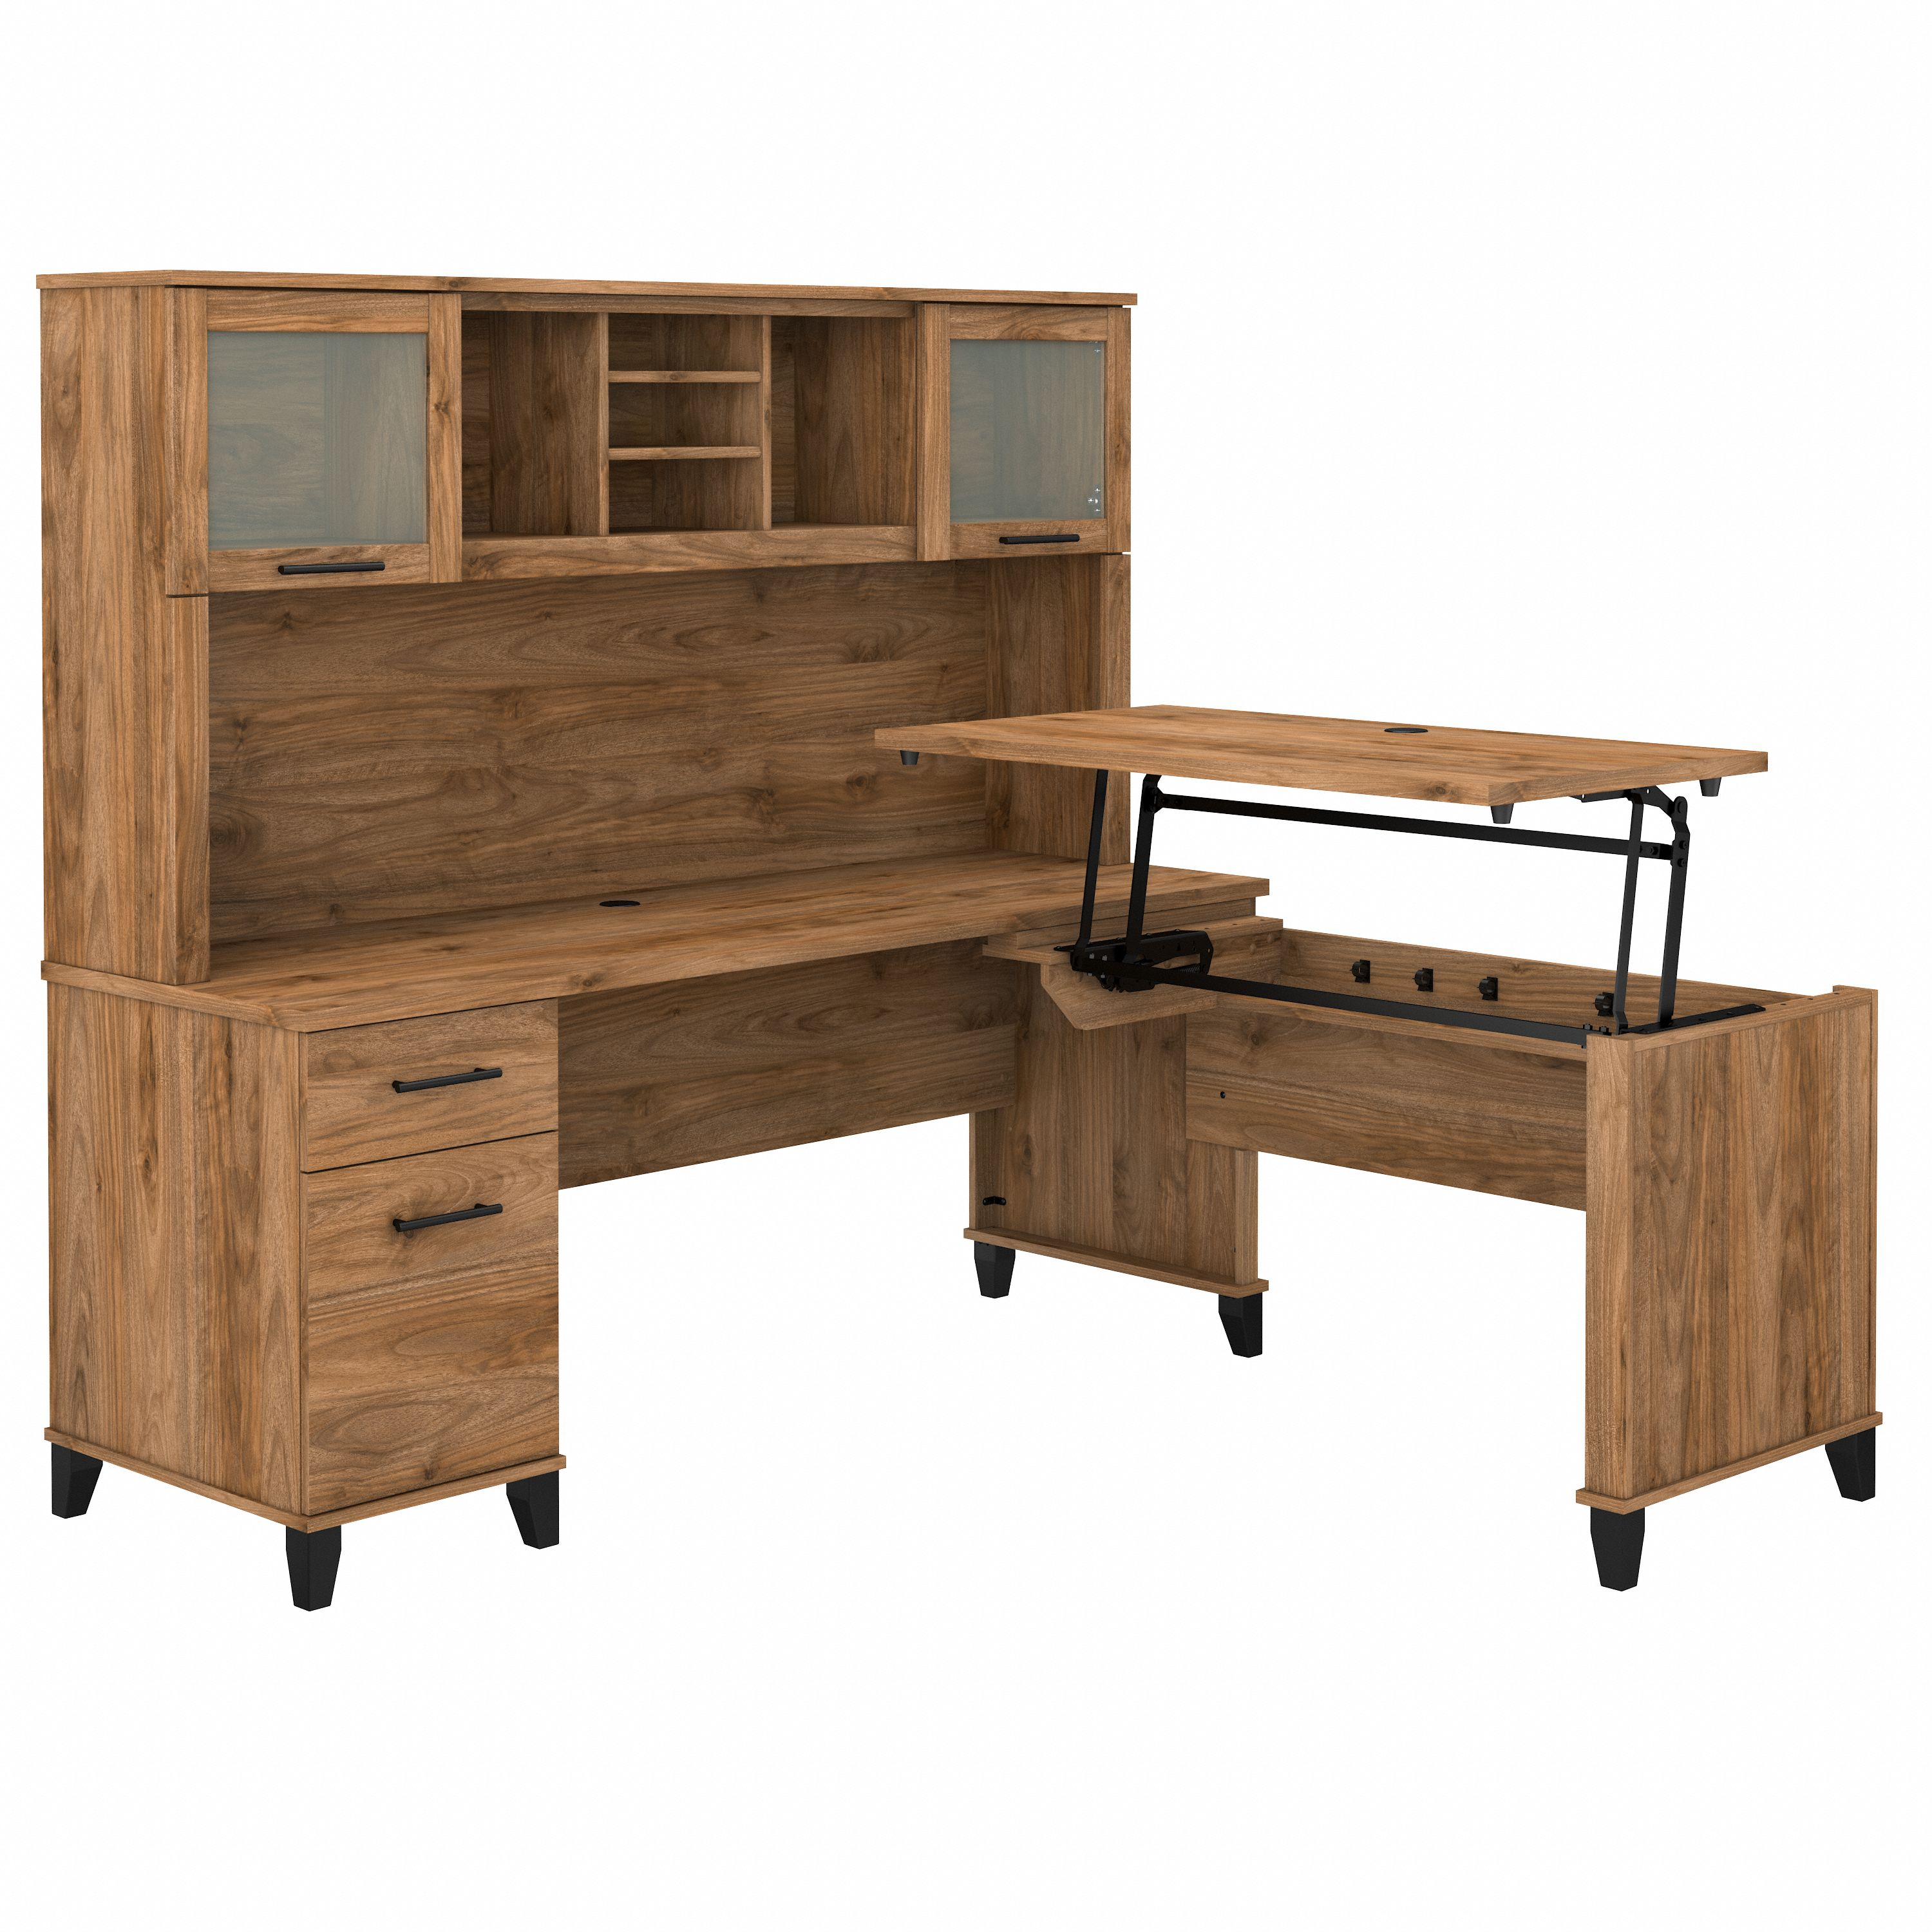 Shop Bush Furniture Somerset 72W 3 Position Sit to Stand L Shaped Desk with Hutch 02 SET015FW #color_fresh walnut